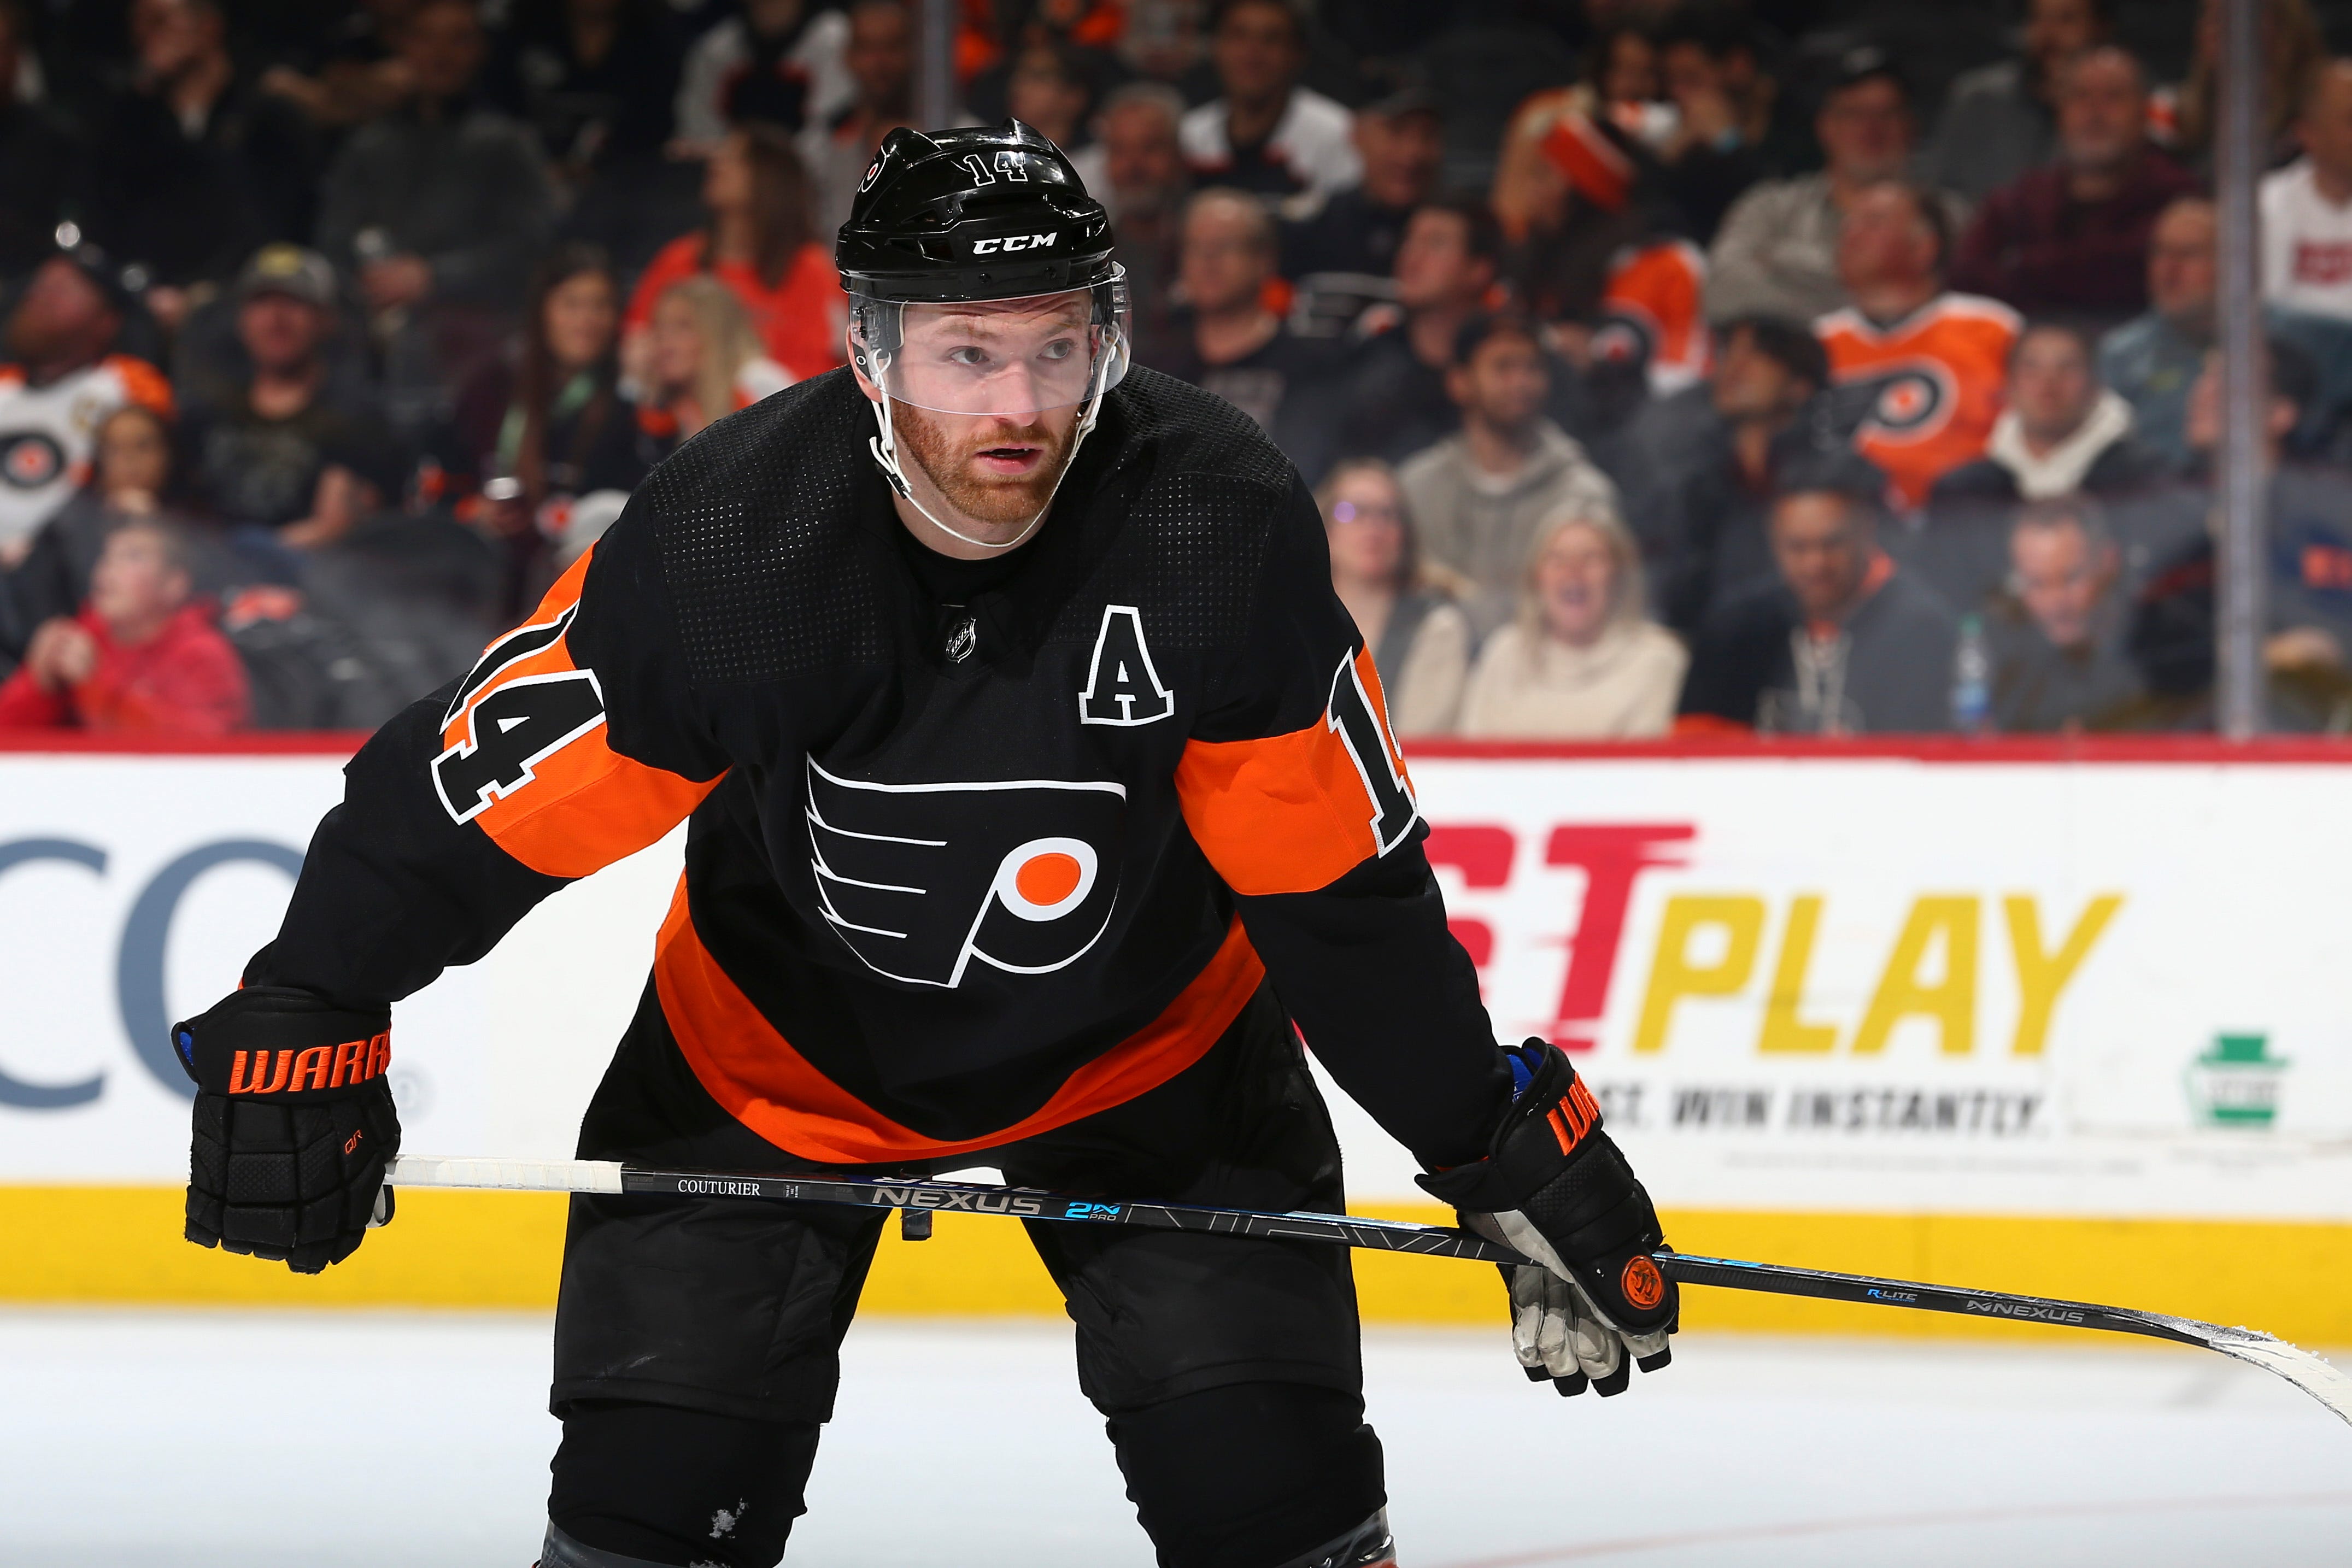 See Flyers' first goal in NHL game 